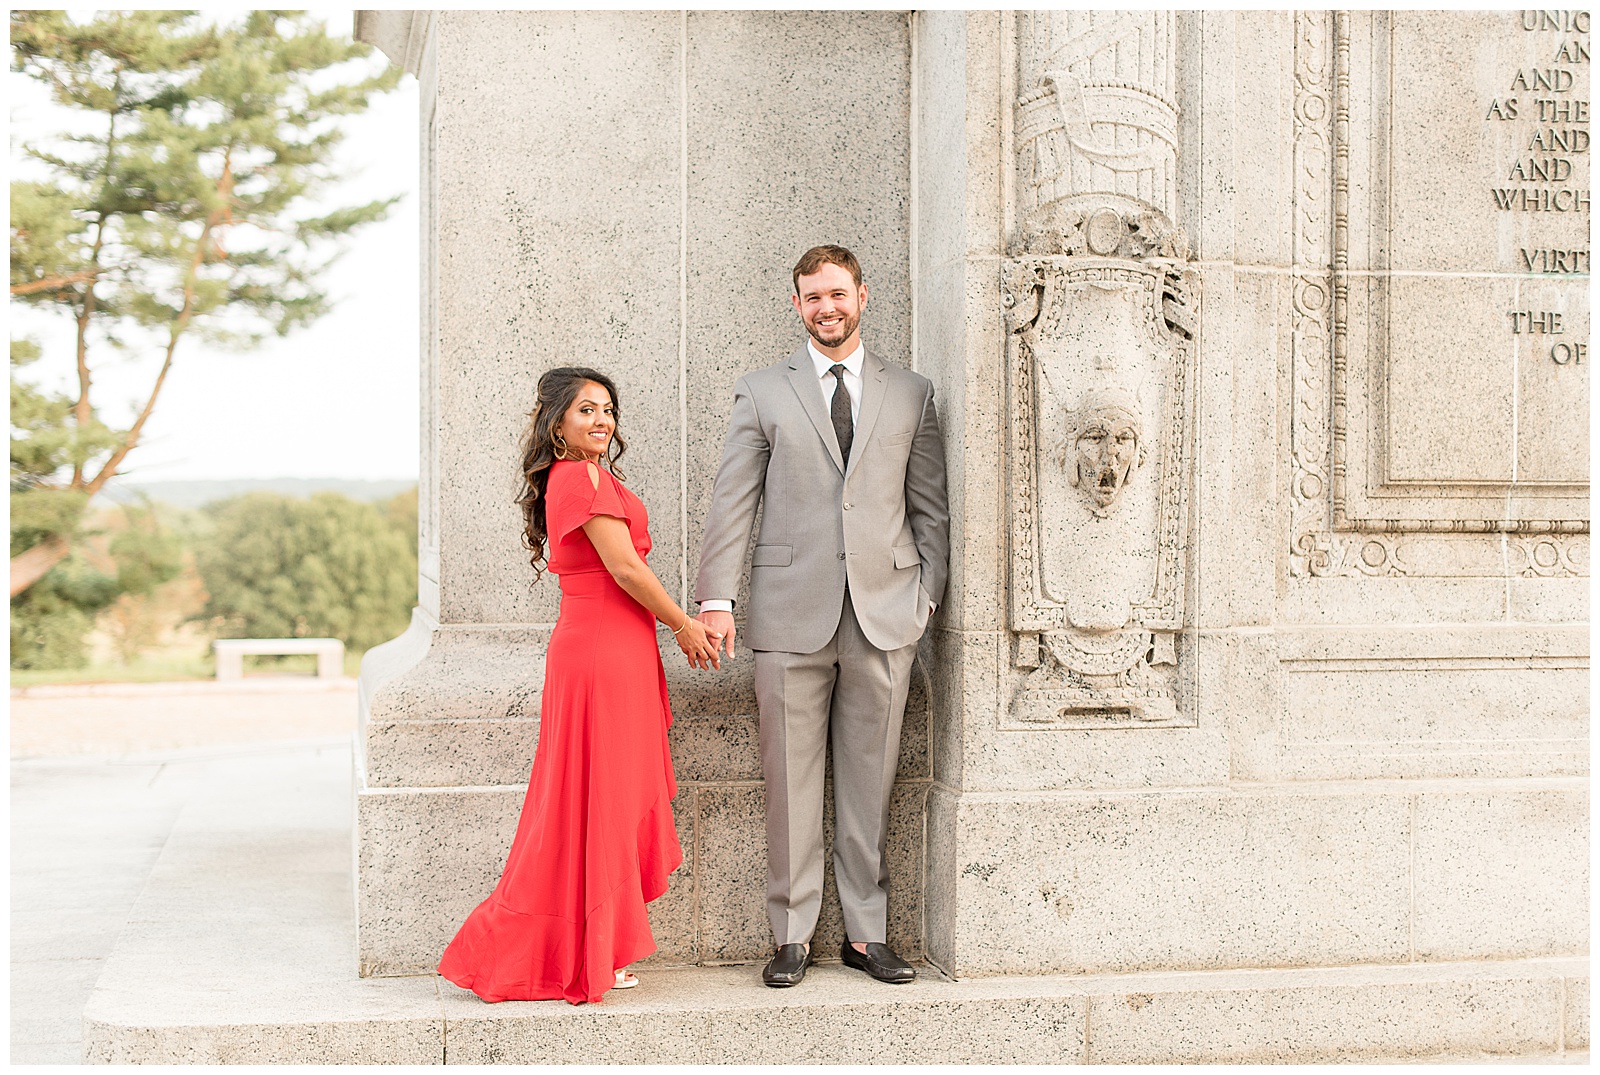 couple is standing in corner of large archway with the girl on the left and guy on the right and her body is turned towards the guy with her right hand holding his left hand as she looks directly at the camera smiling and the guy has his left hand in his pocket as he looks at the camera smiling at the National Memorial Arch in Valley Forge, PA